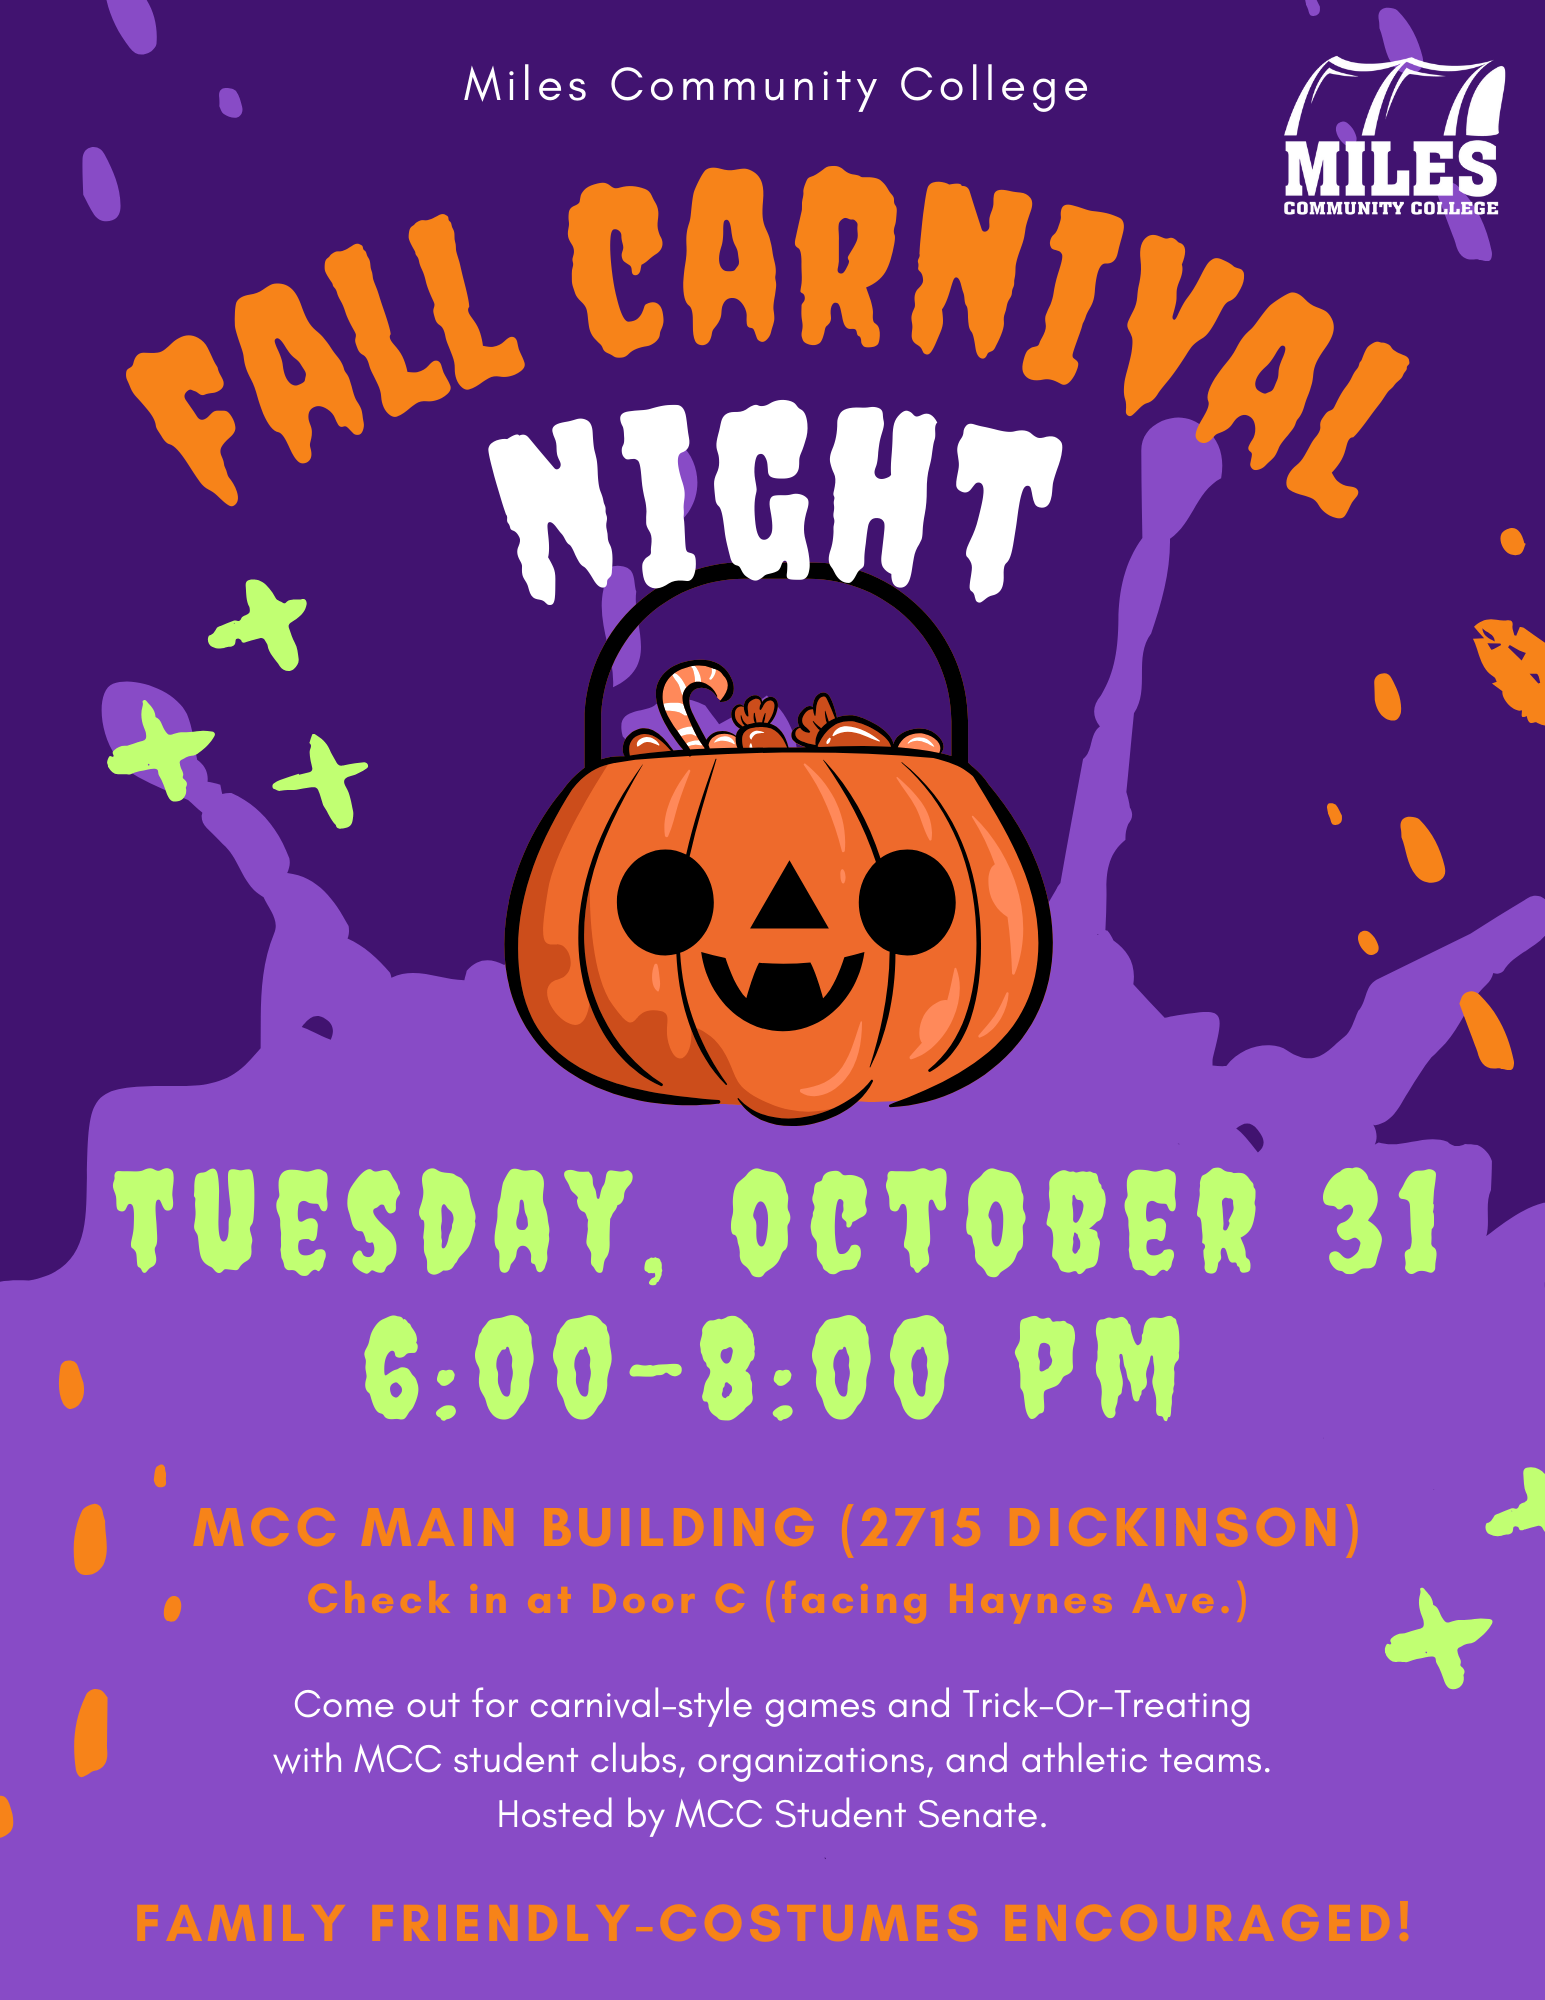 Graphic of 'Fall Carnival Night' flyer